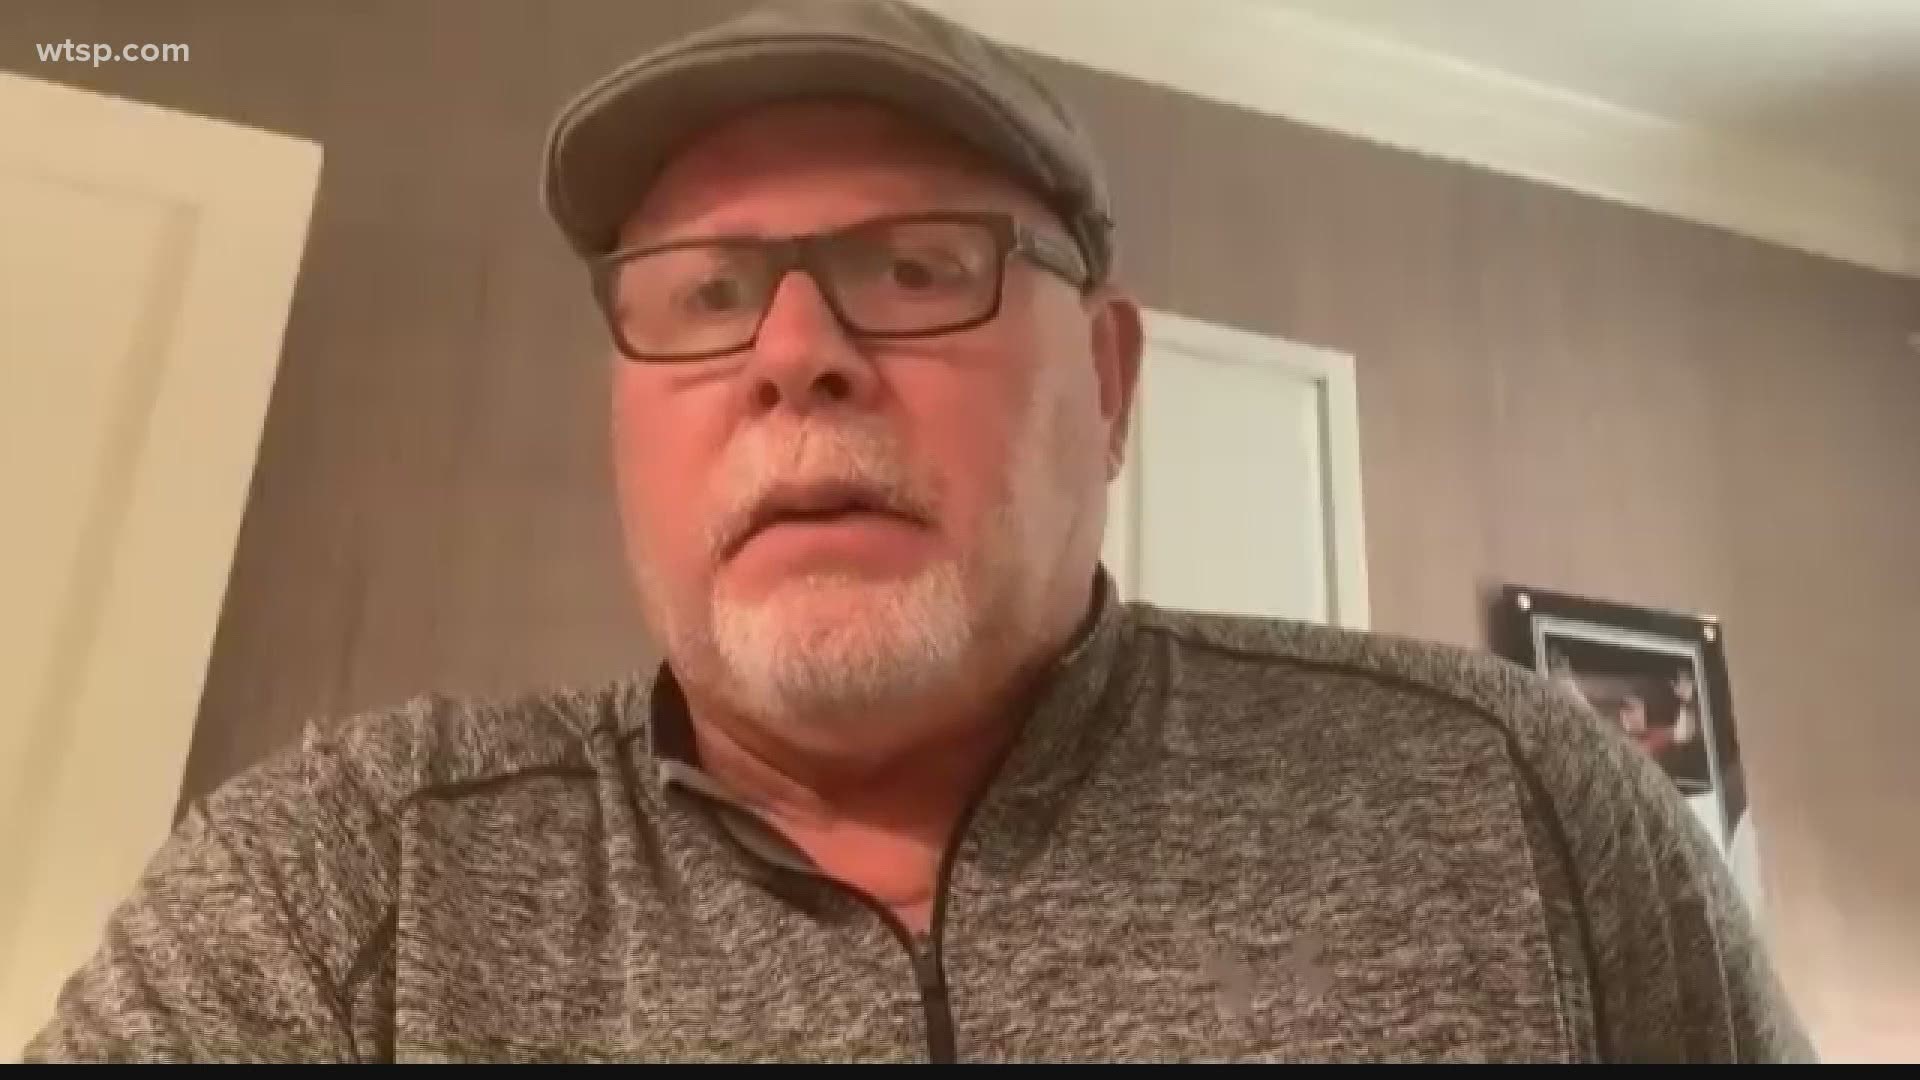 Tampa Bay Buccaneers coach Bruce Arians asked the community to take action against racism.